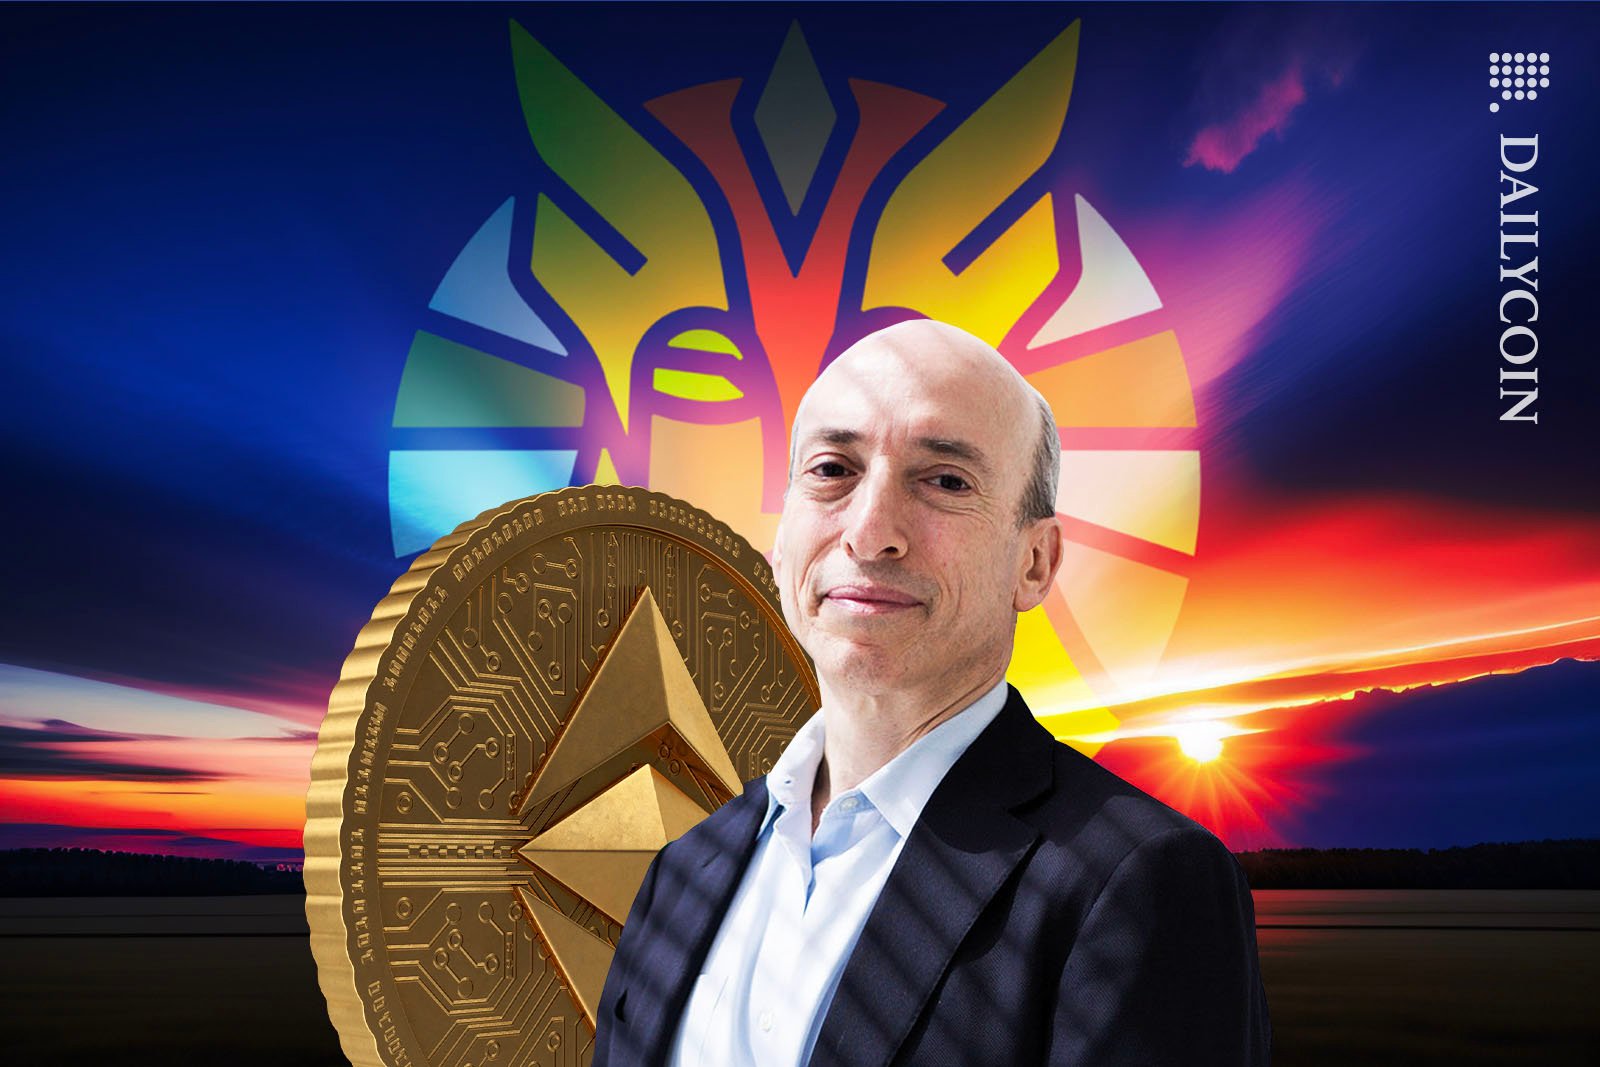 Gary Gensler smiling next to an Ethereum coin, infront of a Valkyrie logo.